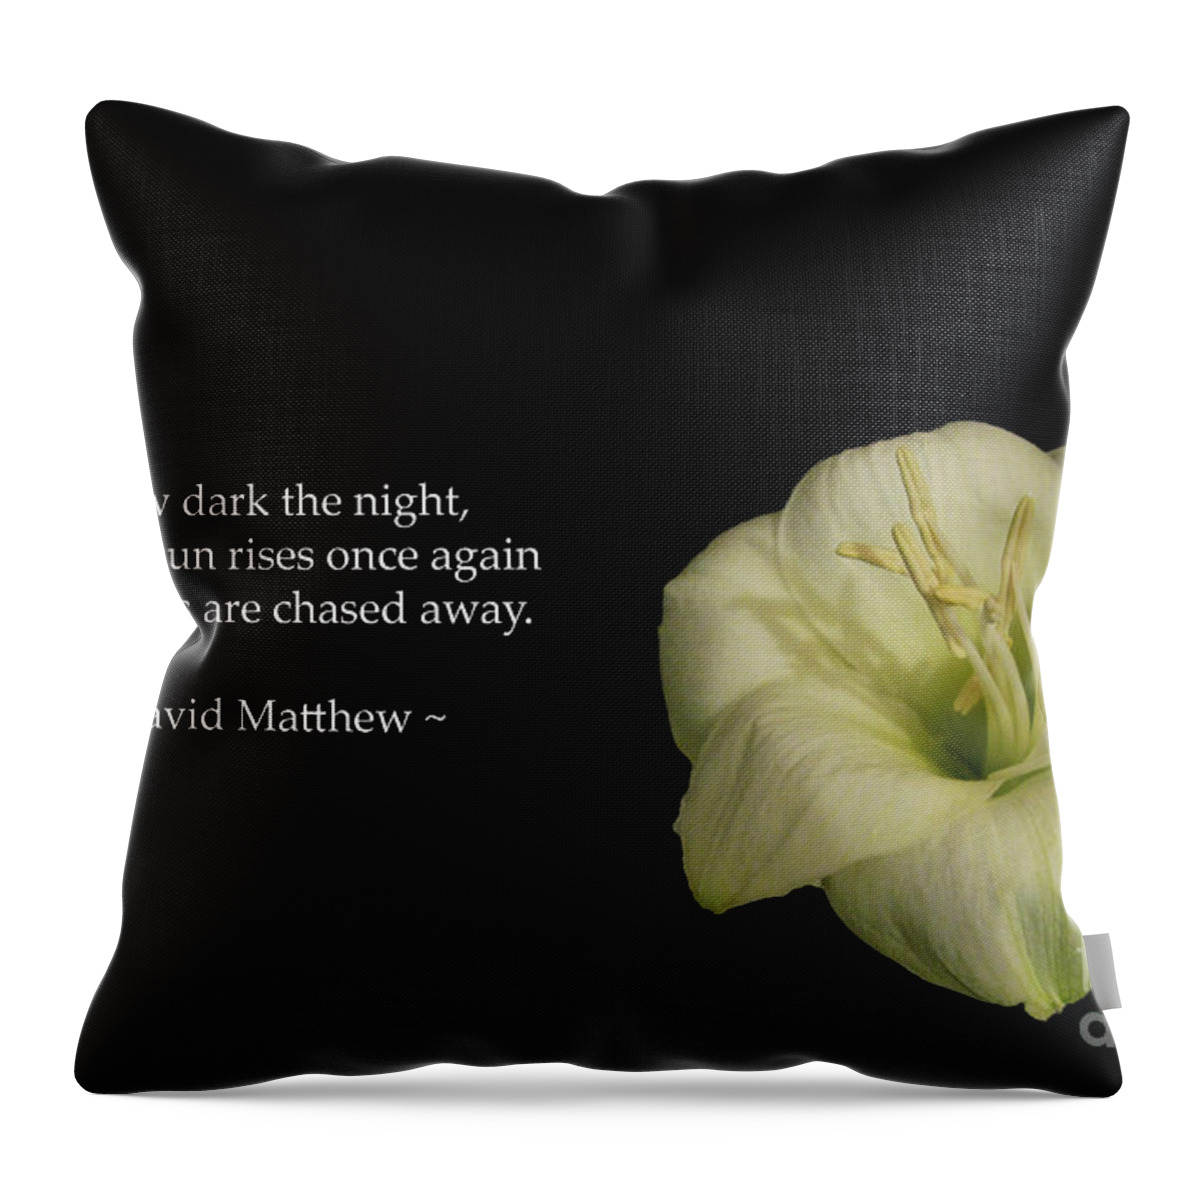 Inspirational Throw Pillow featuring the photograph White Lily In The Dark Inspirational by Ausra Huntington nee Paulauskaite